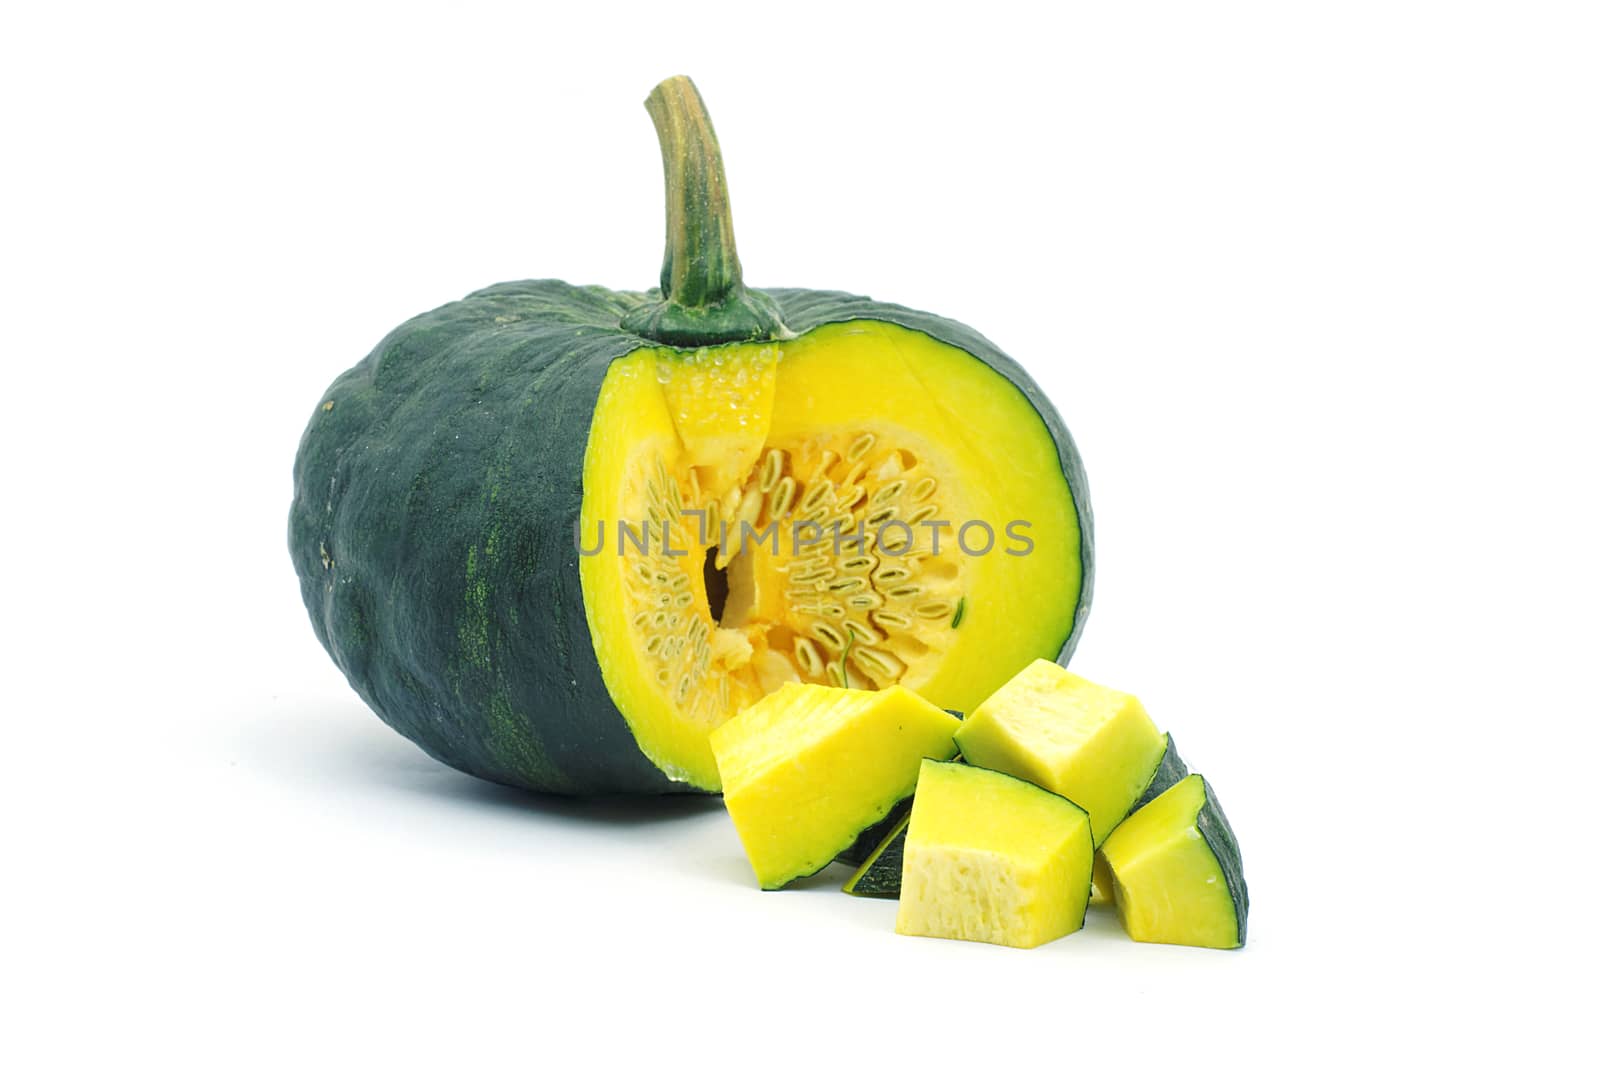 Sliced raw yellow pumpkin on white background. by ninelittle